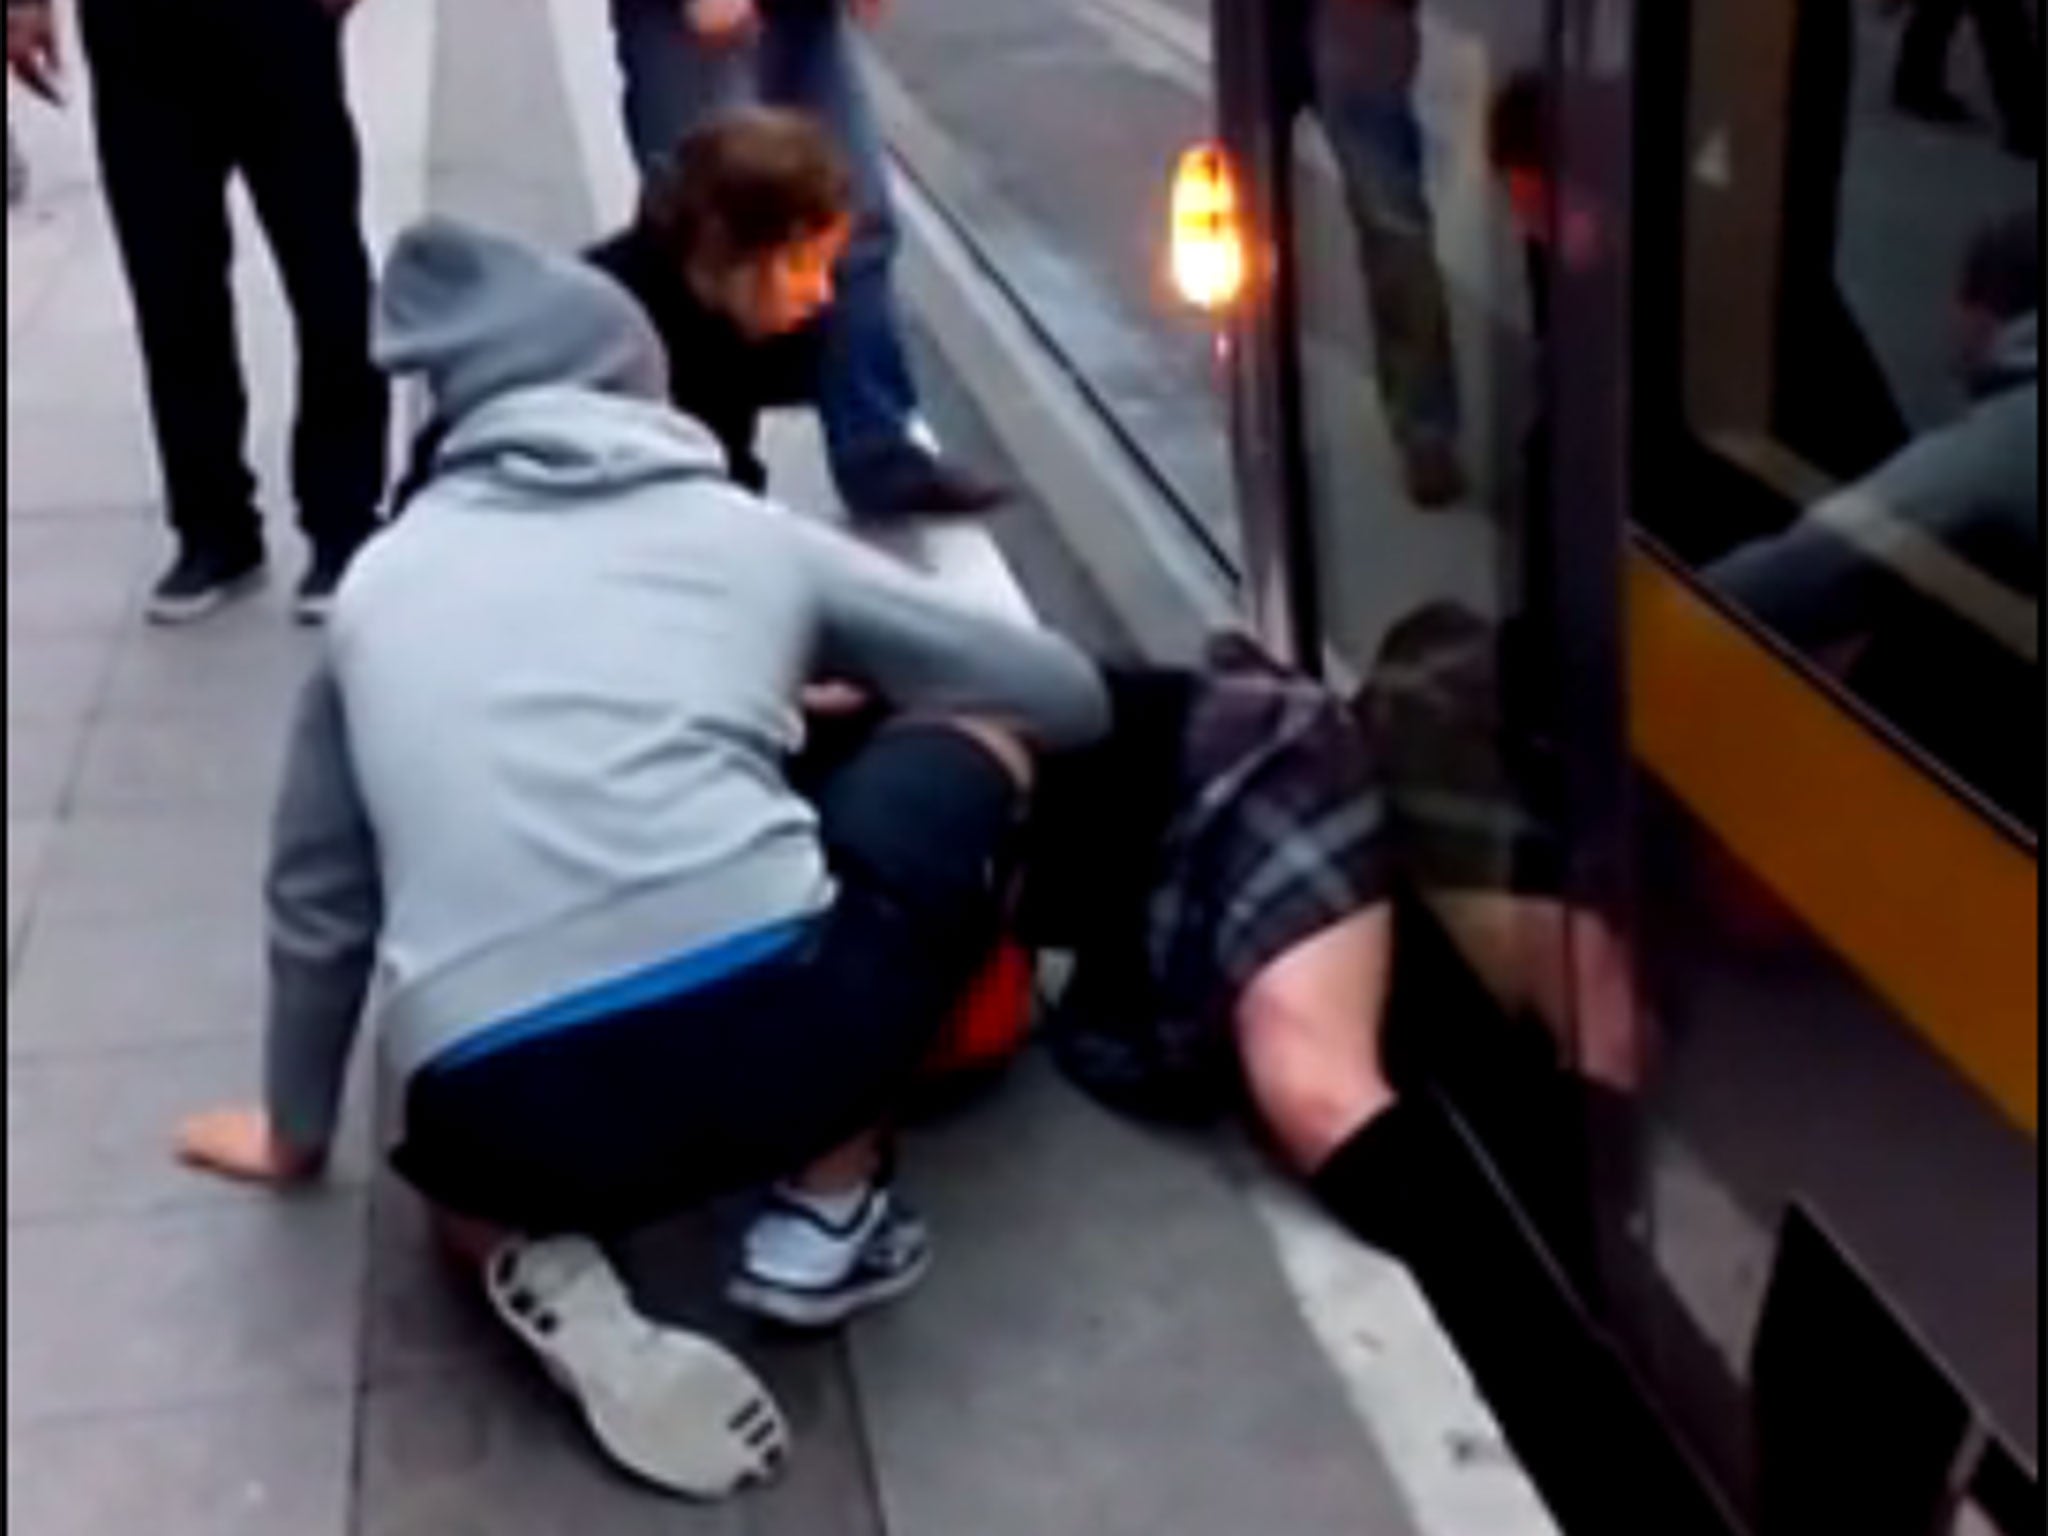 A still from footage showing a schoolgirl trapped under a tram in Dublin